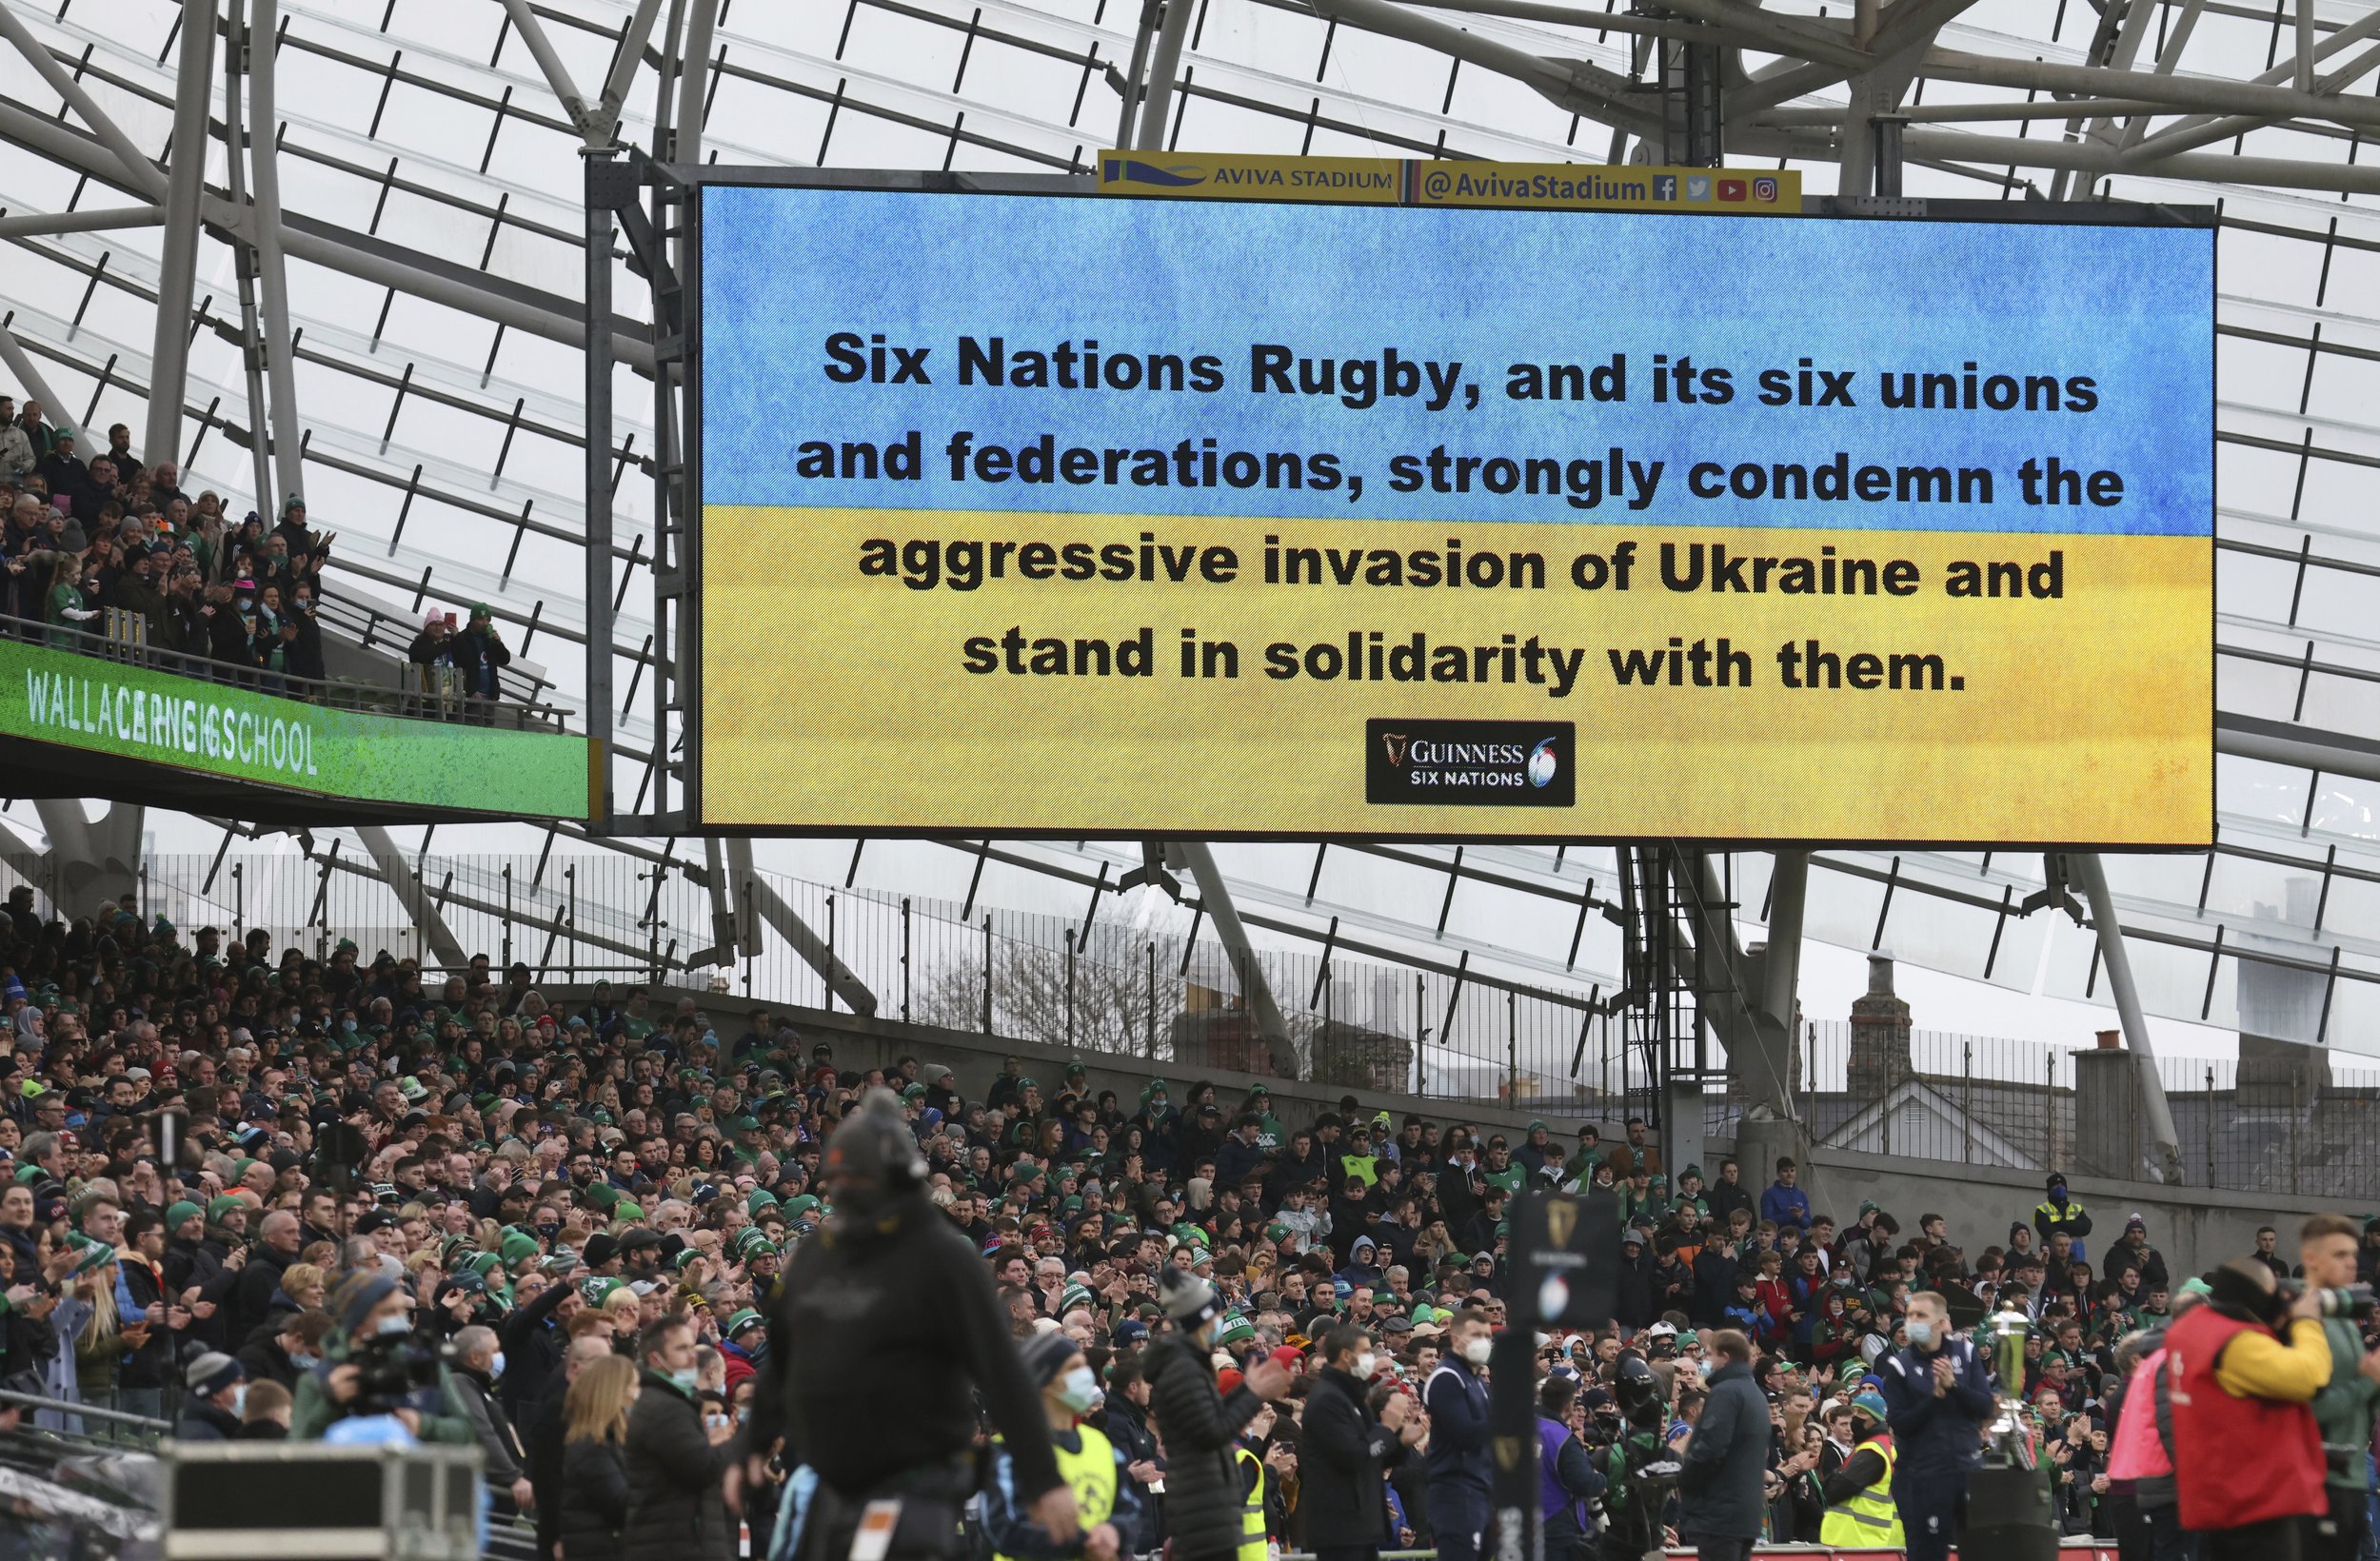  An electronic screen displays a message from the Six Nations Rugby in support of Ukraine, ahead of the rugby union match between Ireland and Italy at the Aviva Stadium in Dublin, Ireland, Sunday, Feb. 27, 2022. (AP Photo/Peter Morrison) 